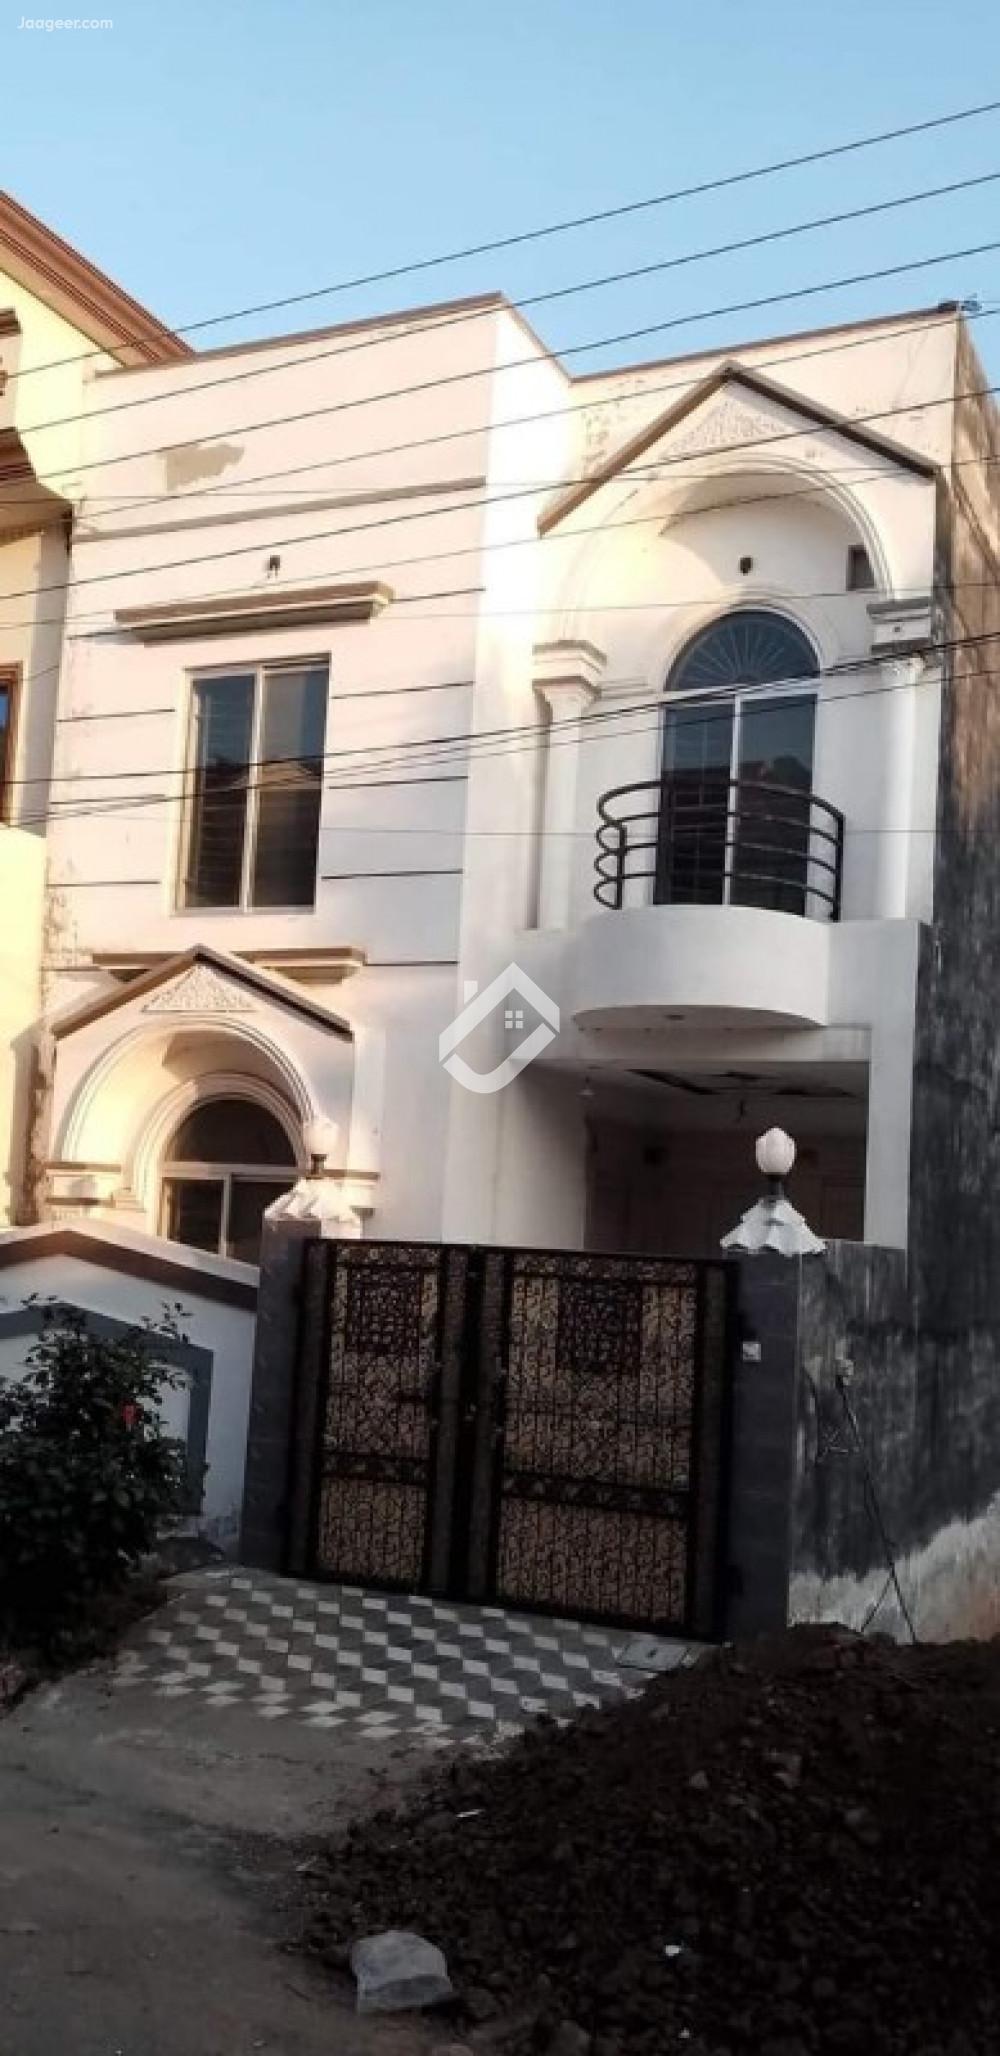 View  3.25 Marla Double Storey House For Sale In Khayaban E Naveed in Khayaban E Naveed, Sargodha